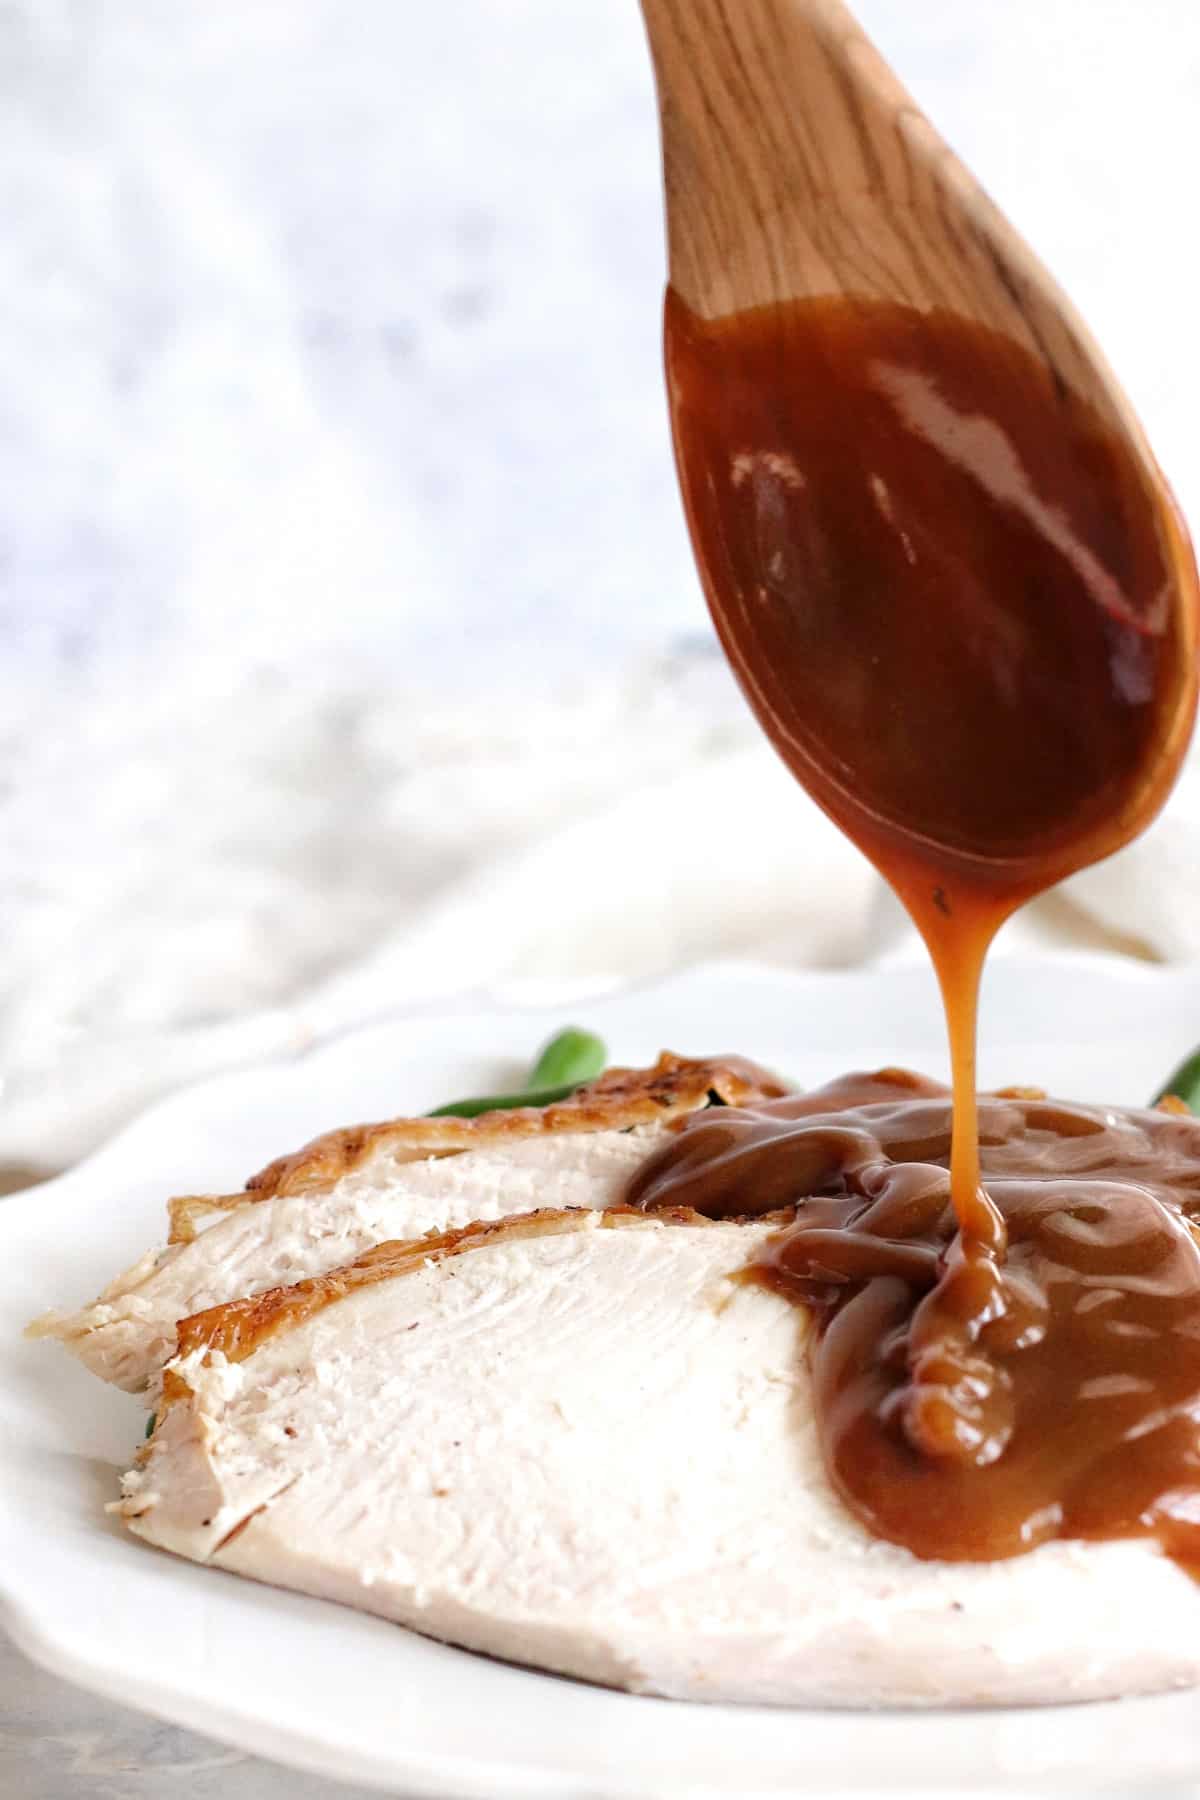 Pouring rich brown gravy from a wooden spoon onto sliced air fryer turkey breast.